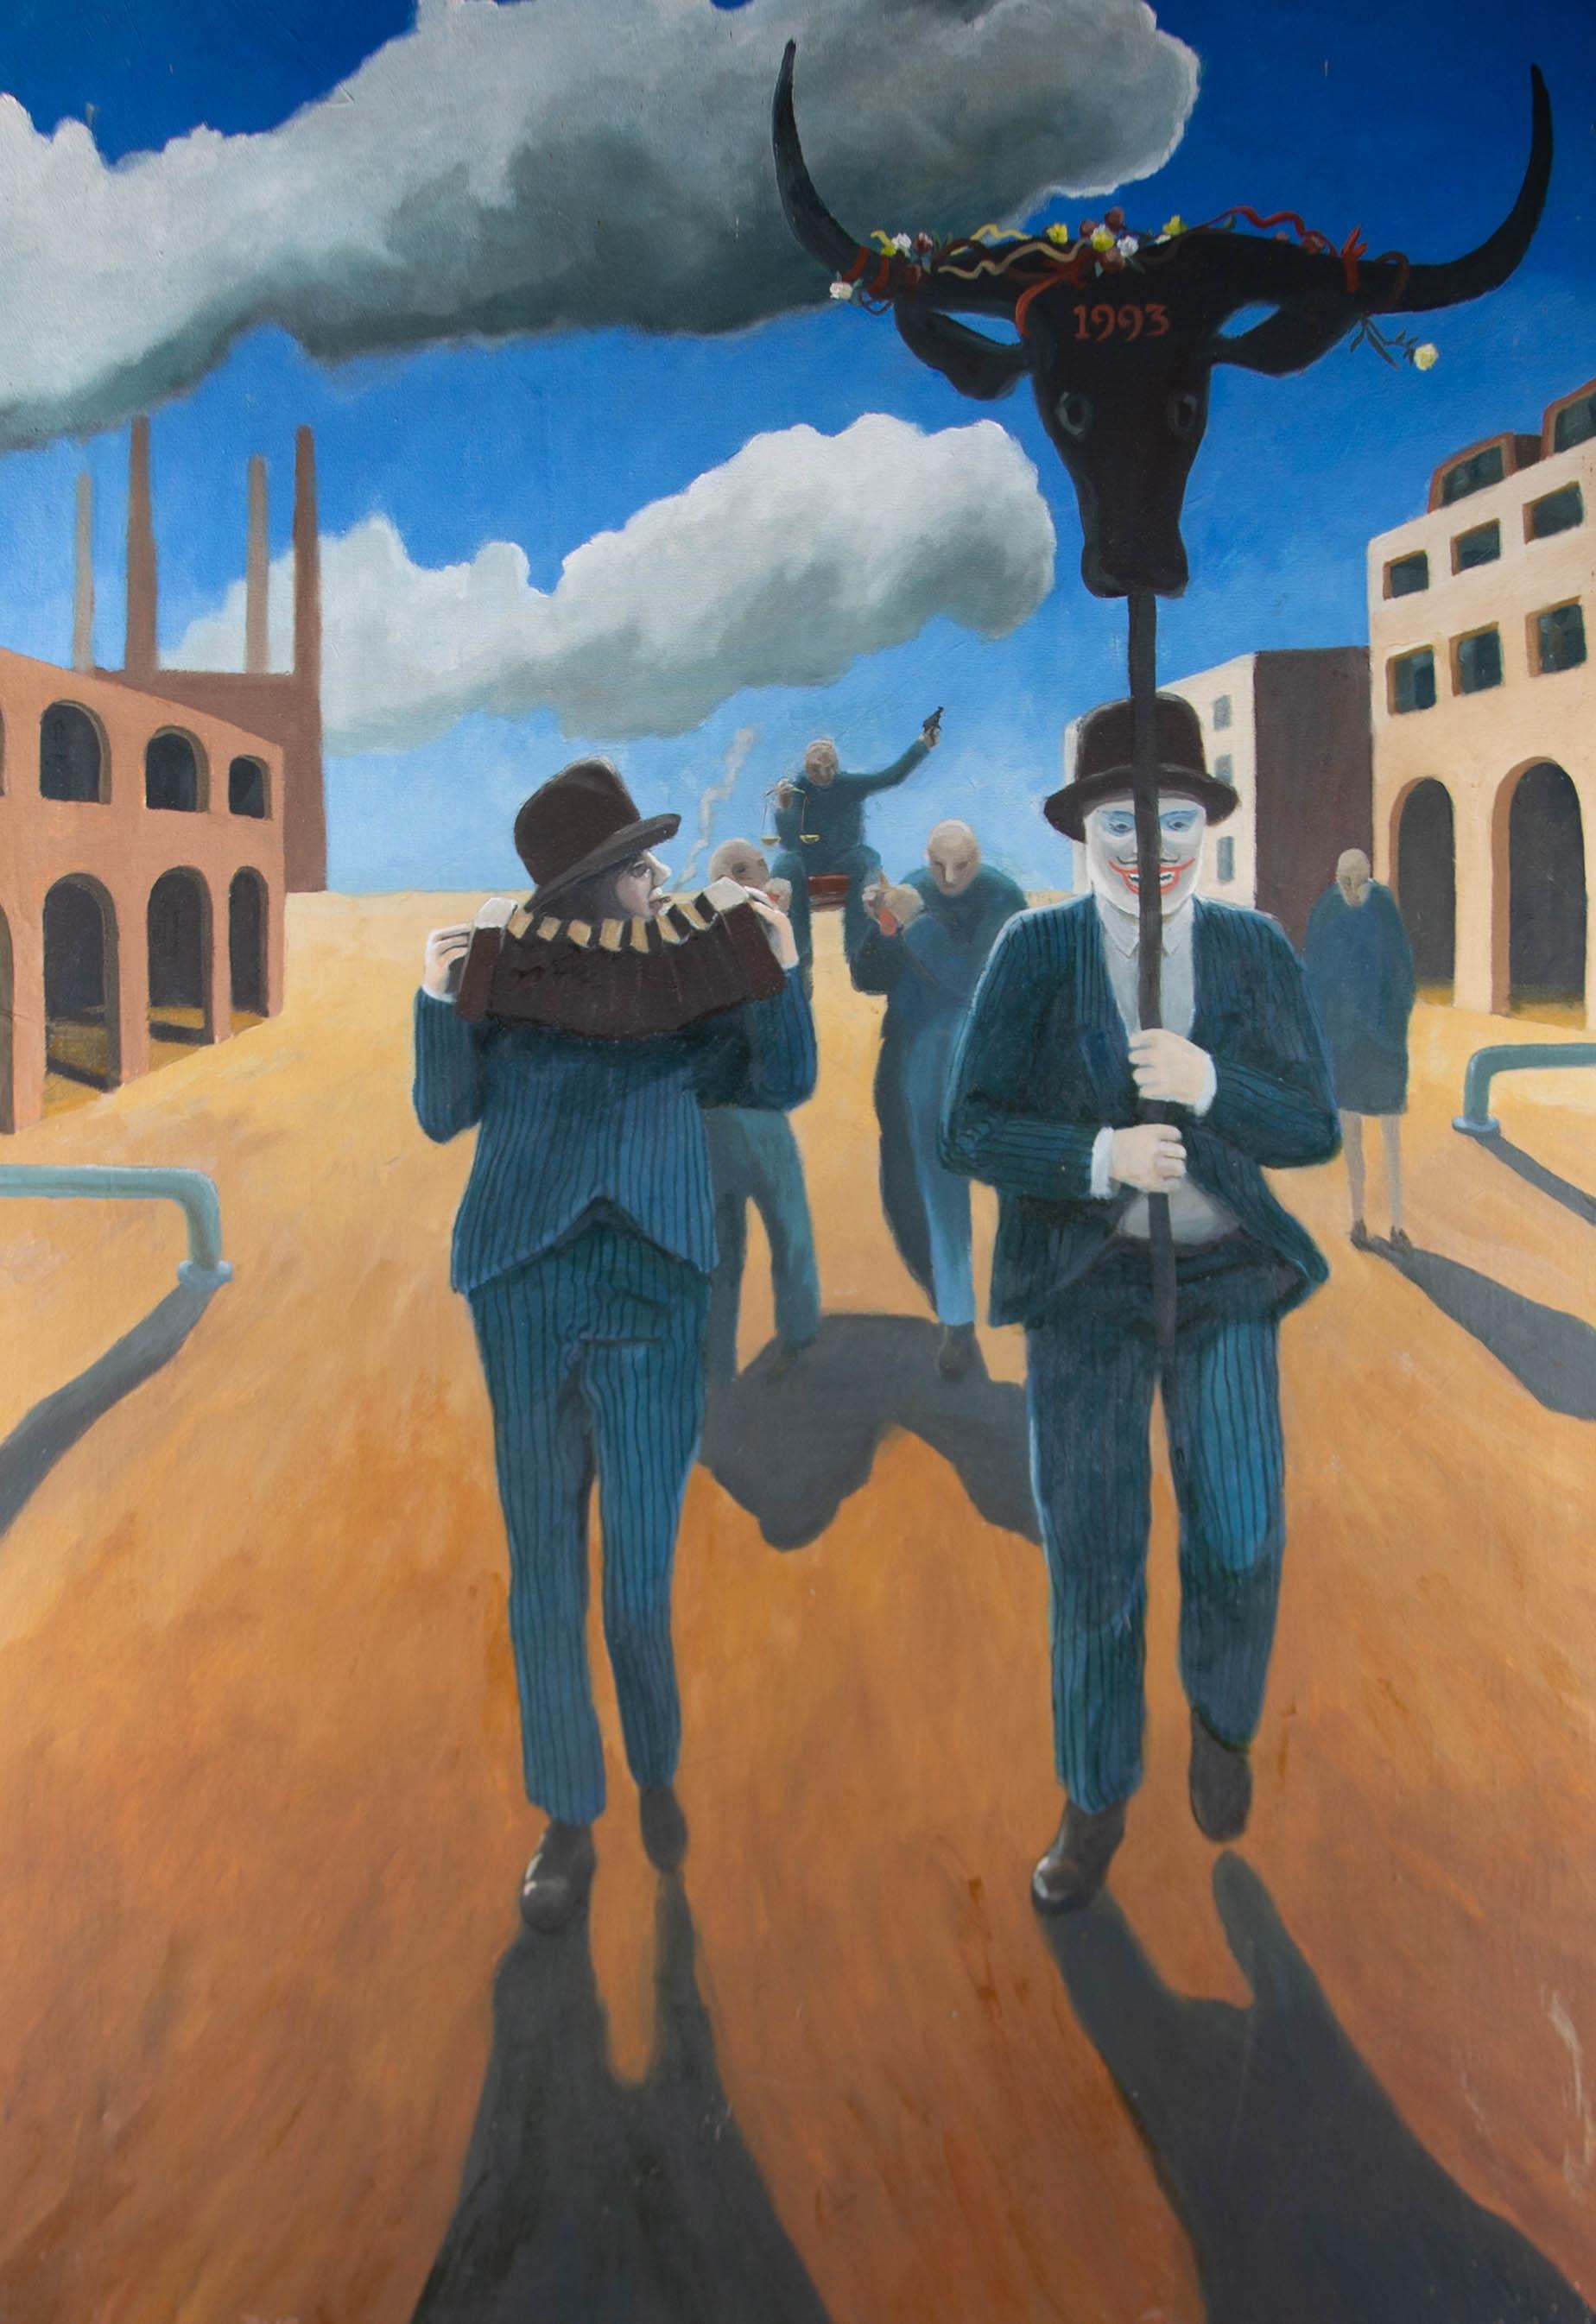 With heavy nods to De Chirico, Vernon has created an unnervingly surreal painting, depicting a sinister parade of figures on a sparse street. The artwork seems to hold heavy political connotations, making hidden commentaries in a profound manner.